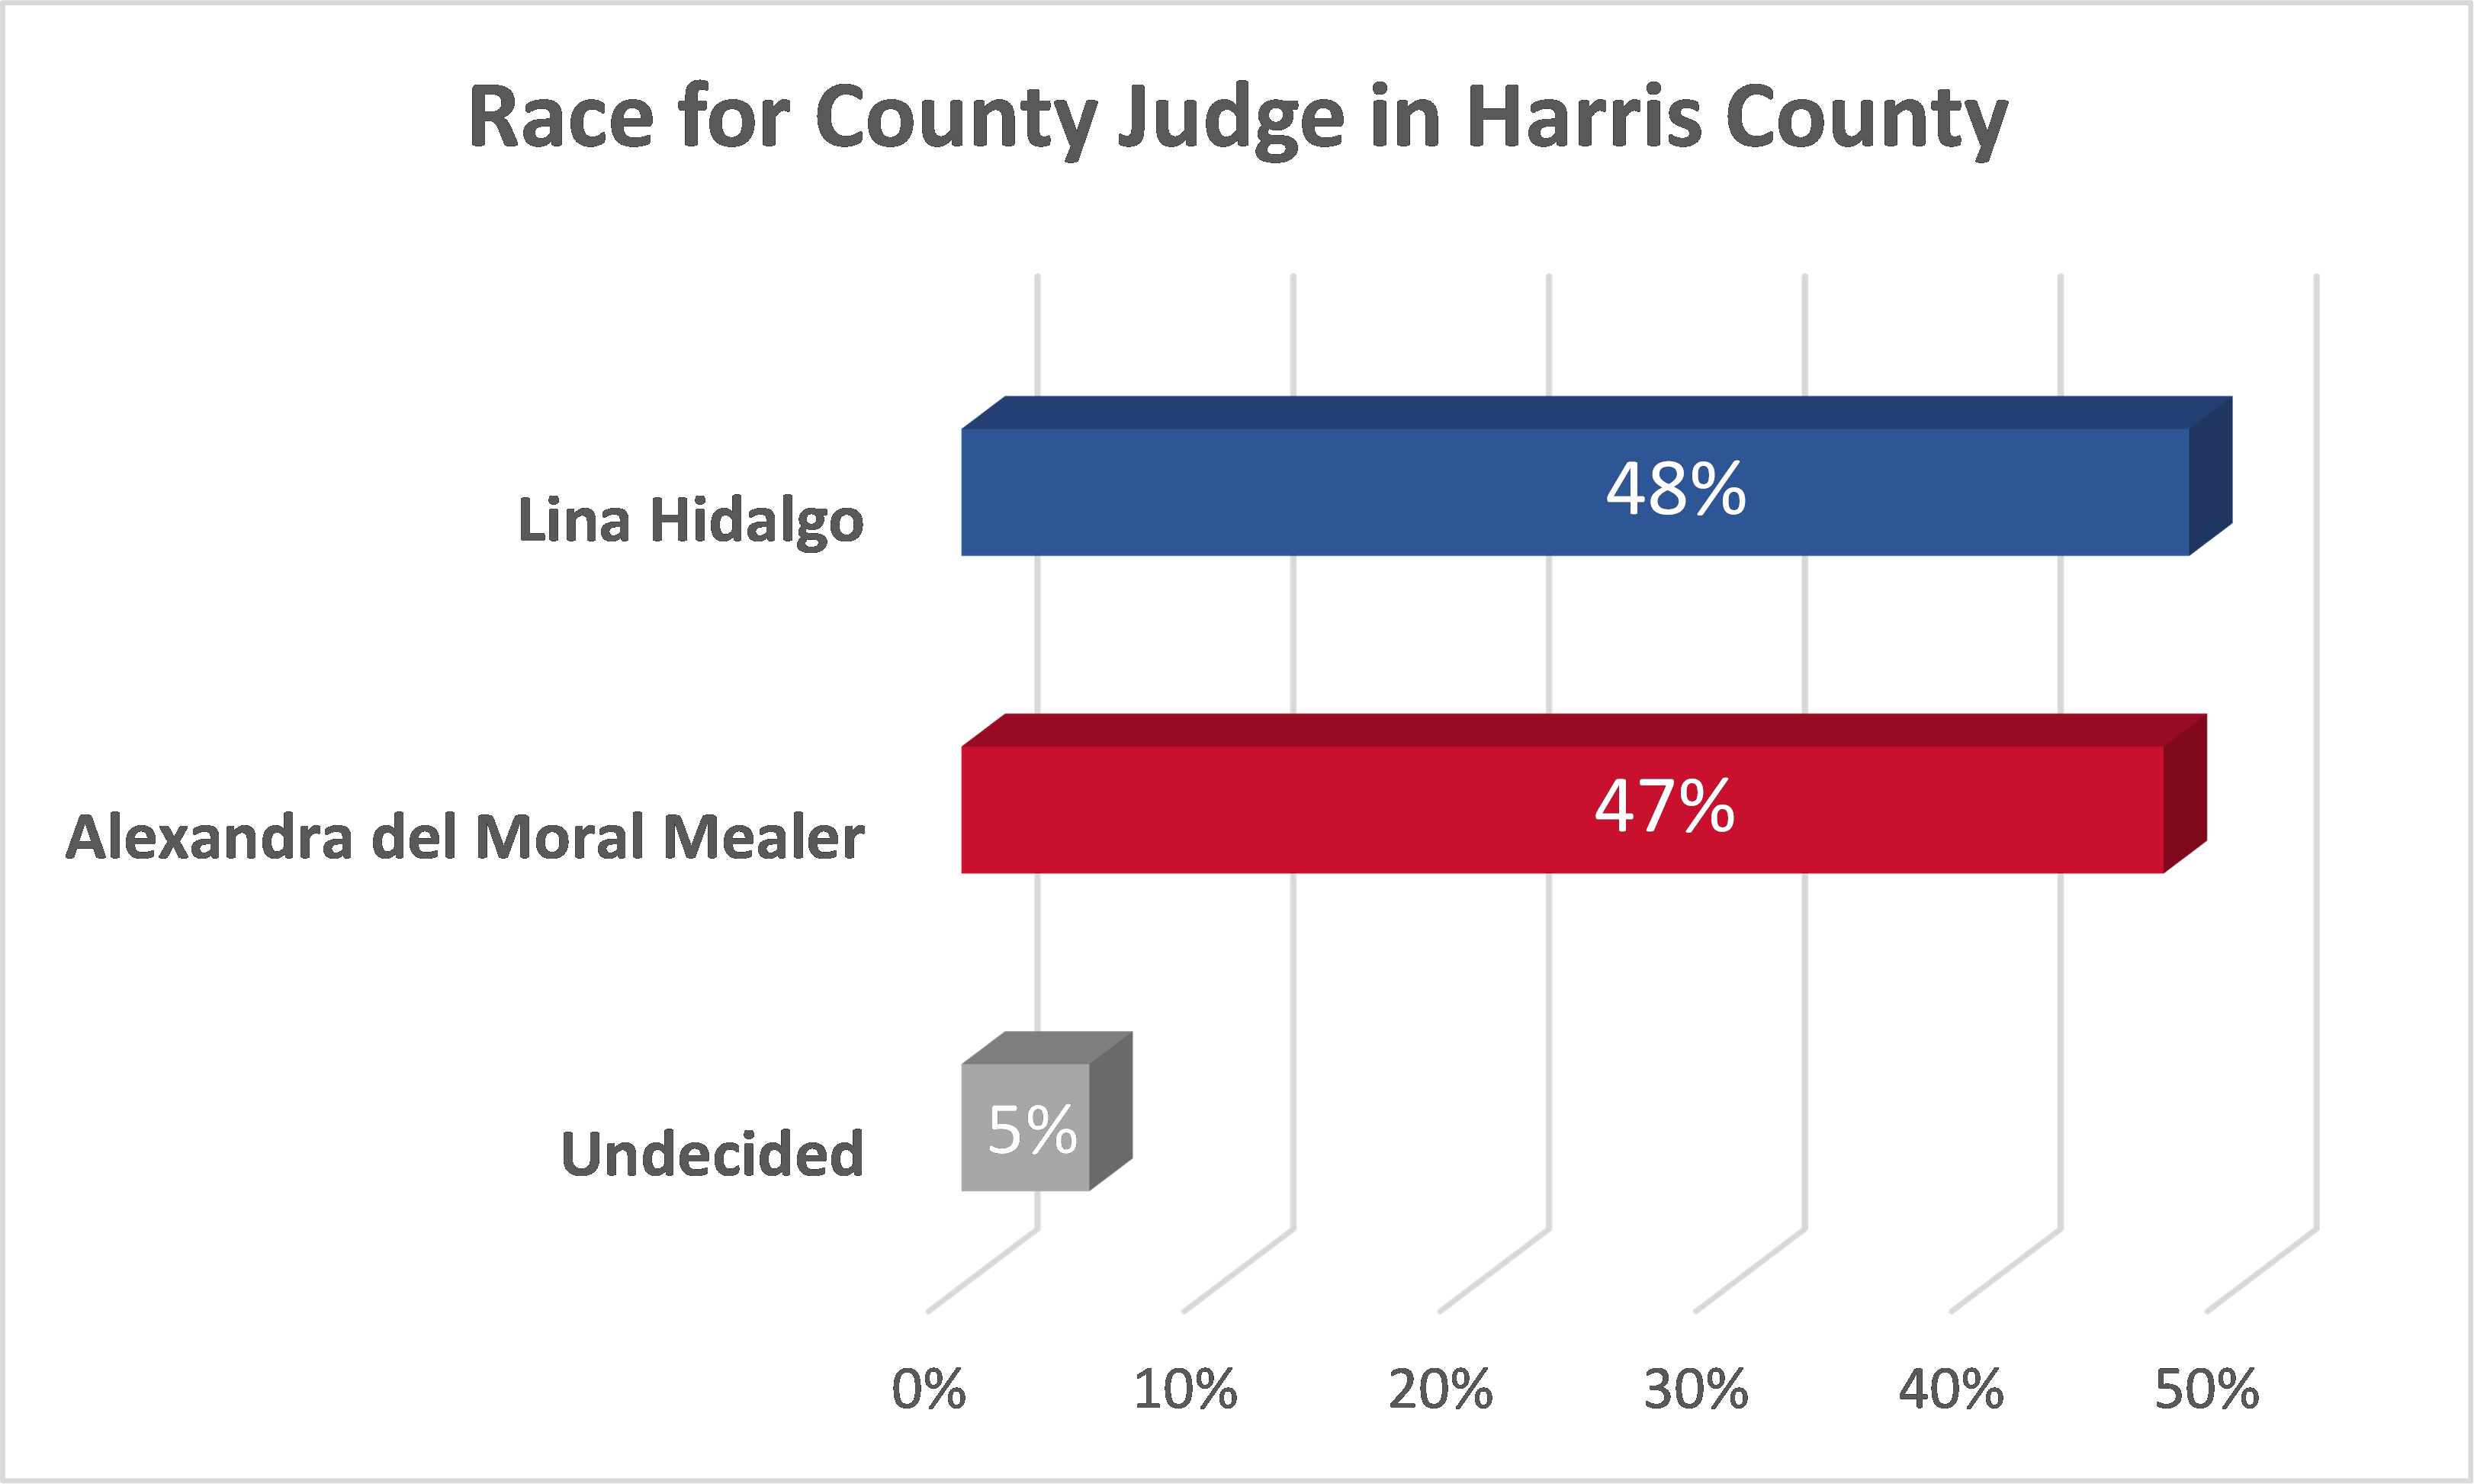 race-for-county-judge-hc.png